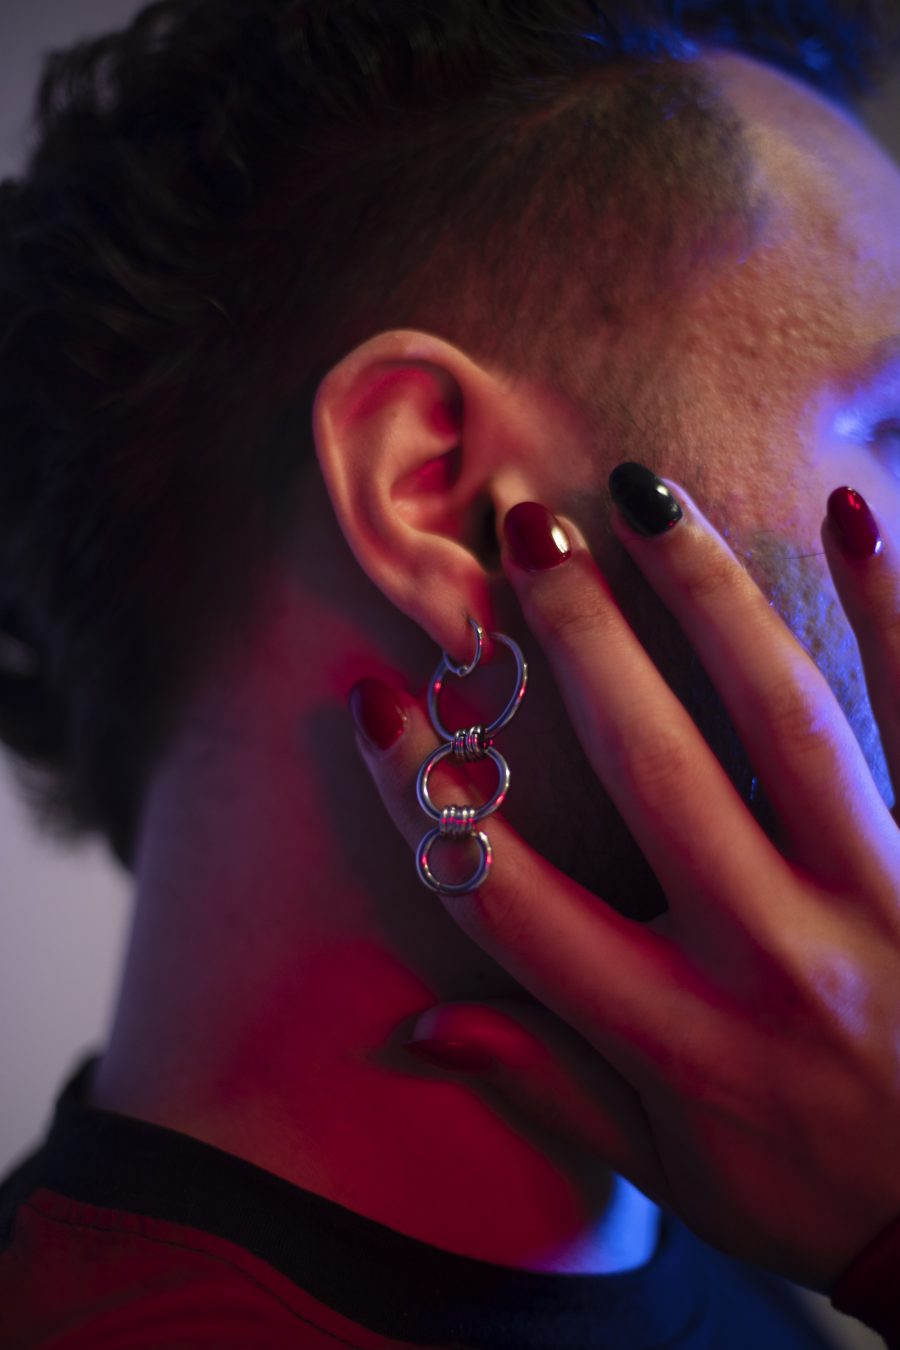 An image of Ulysses' earring and their hand with nail polish on their fingernails.